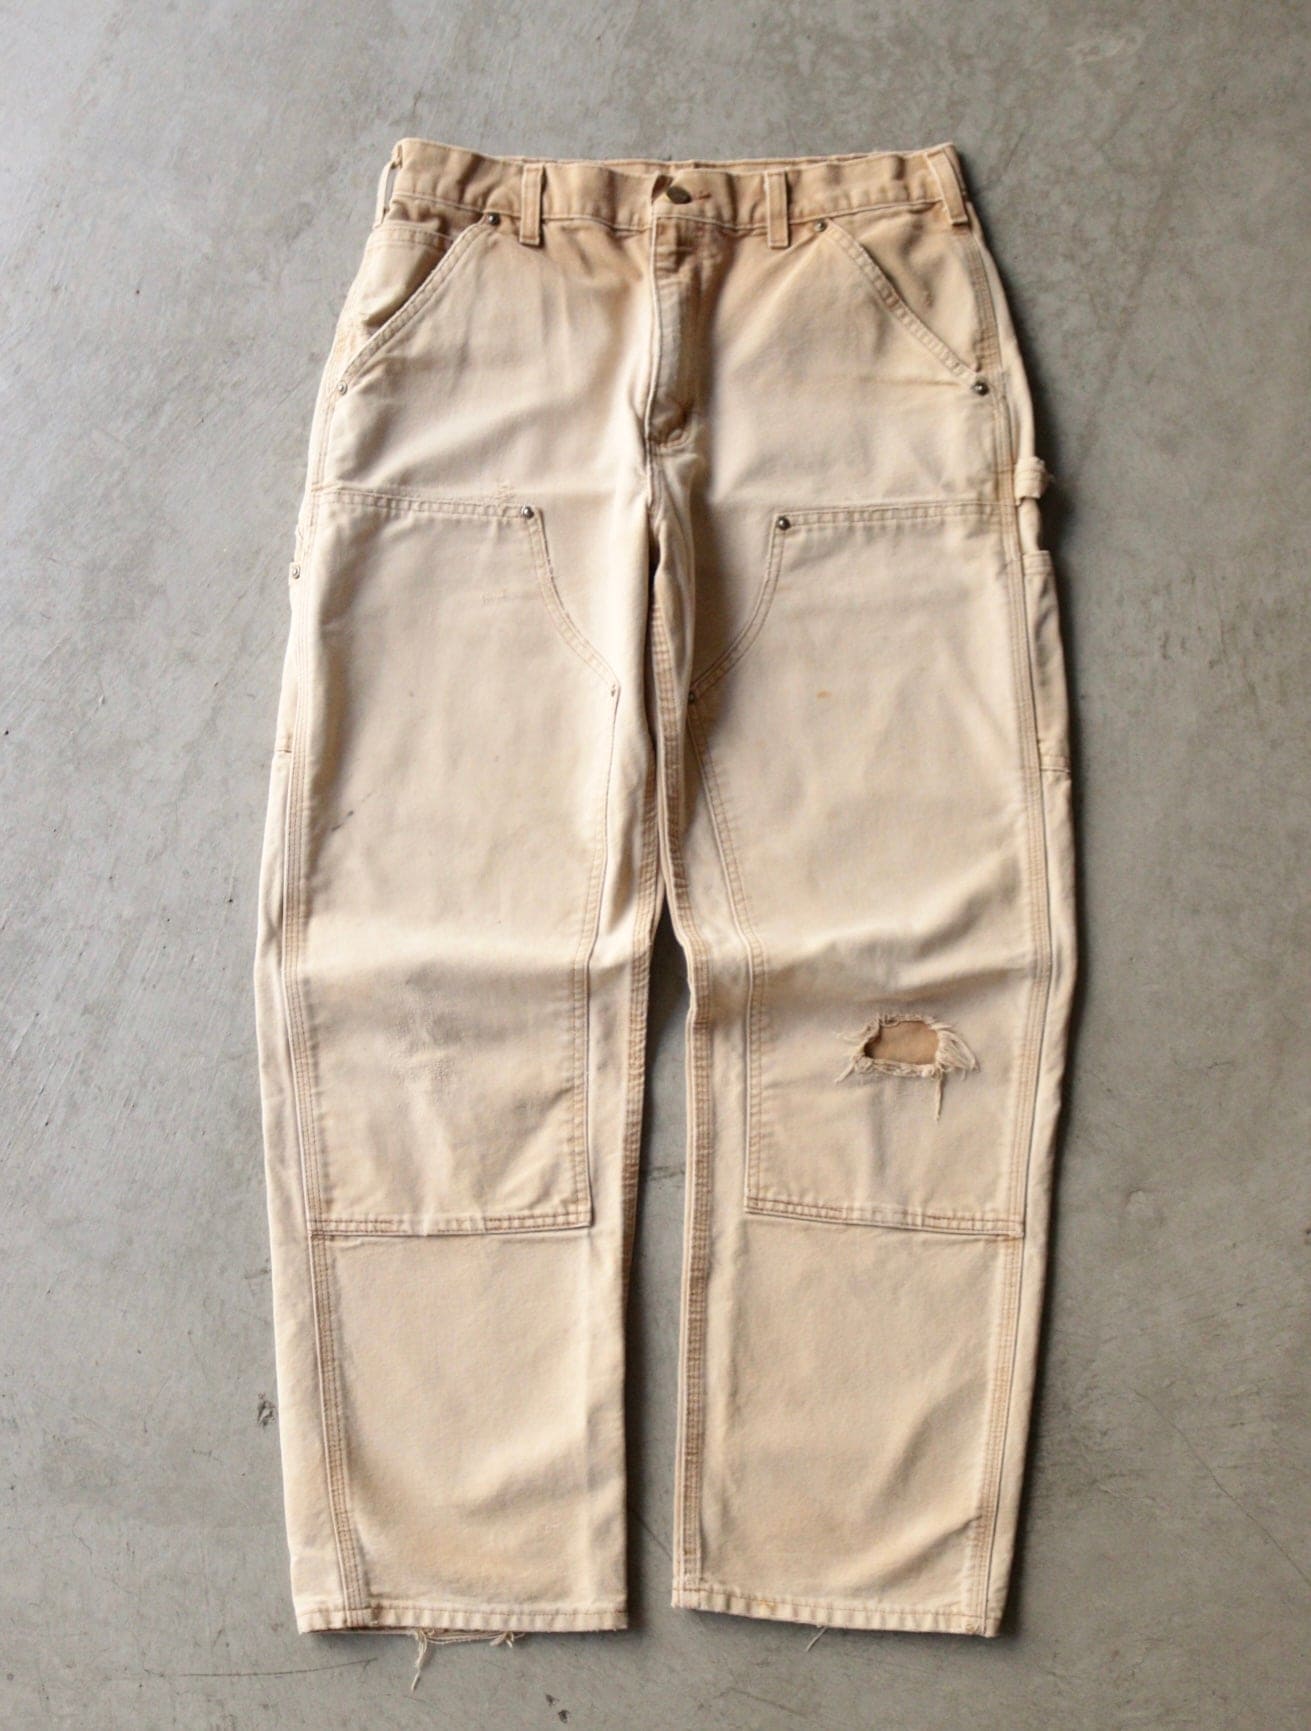 CARHARTT FADED DISTRESSED DOUBLE KNEE WORK PANTS